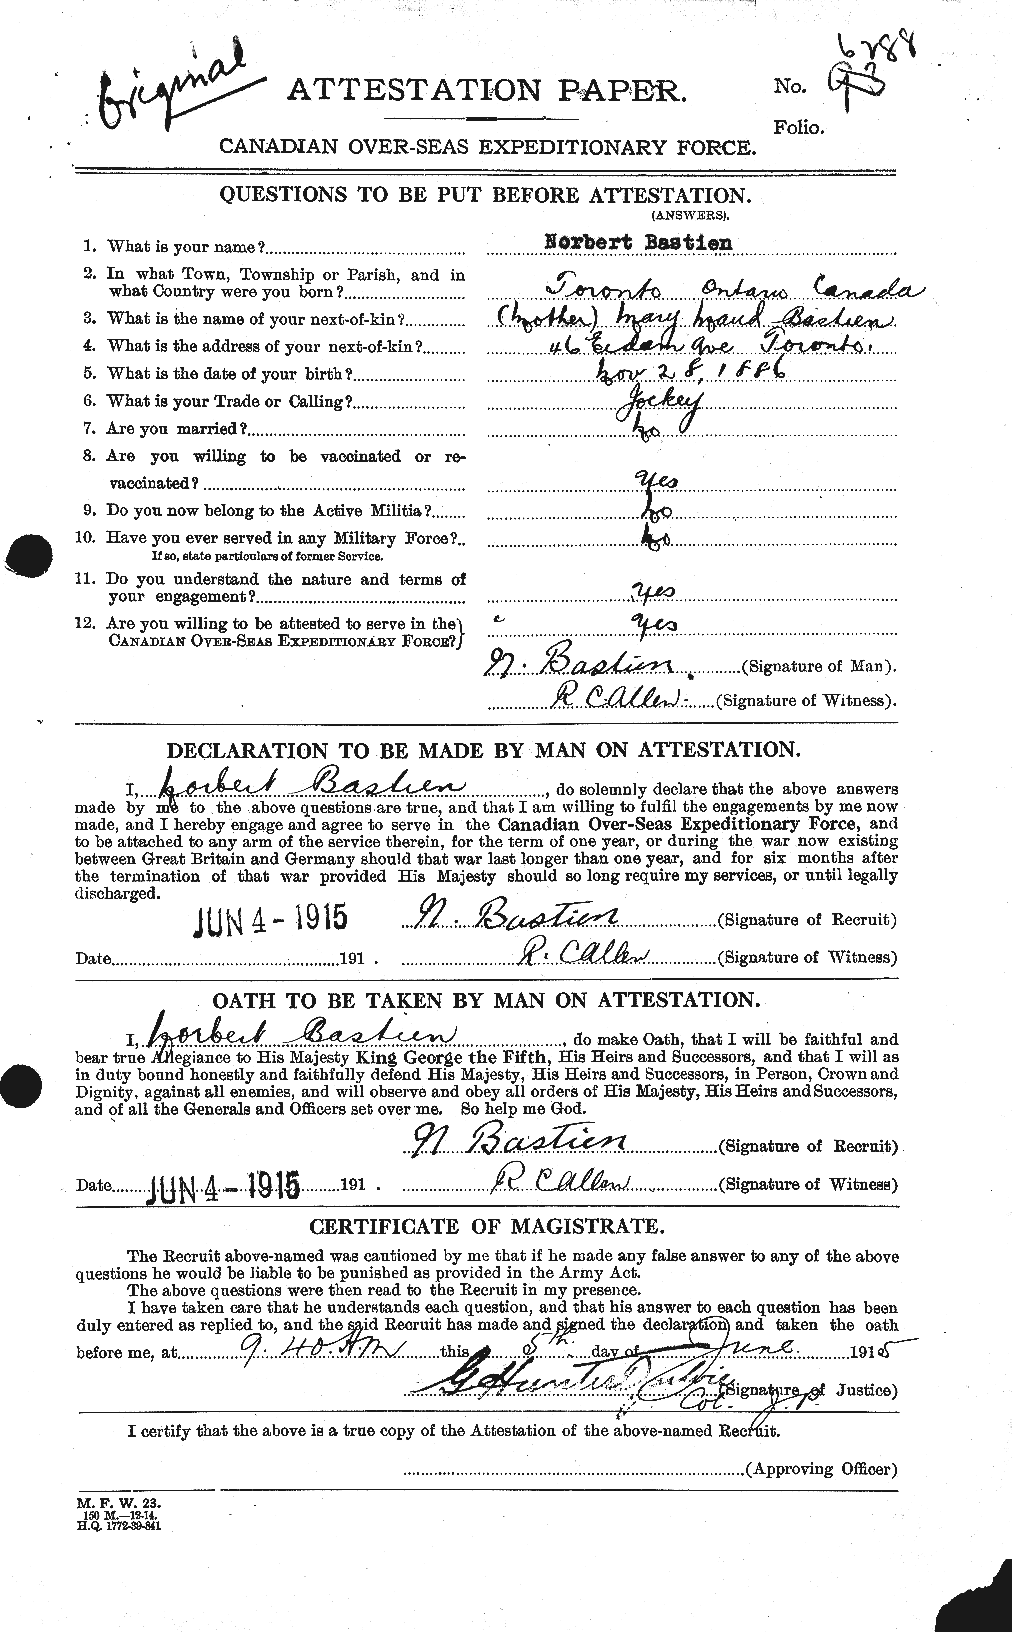 Personnel Records of the First World War - CEF 228226a